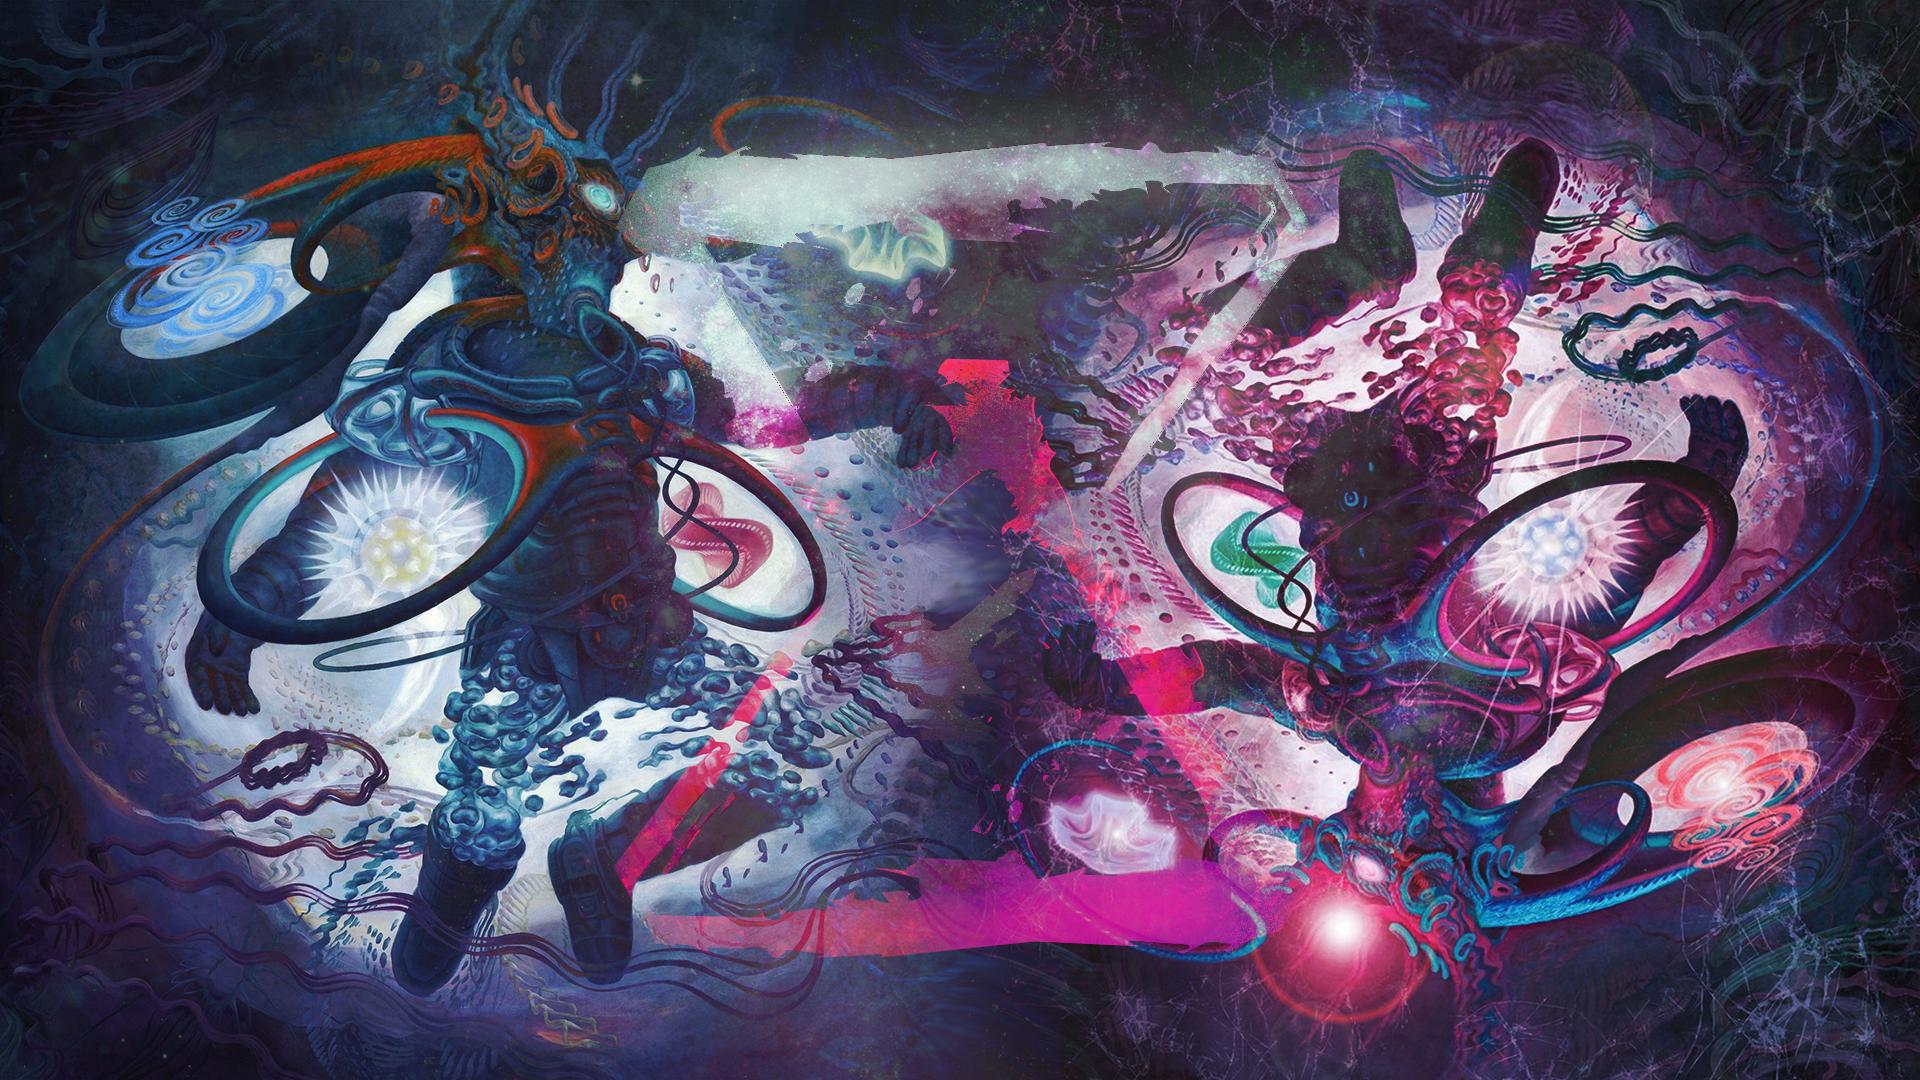 Coheed and Cambria - The Afterman Ascension / Descension Wallpaper